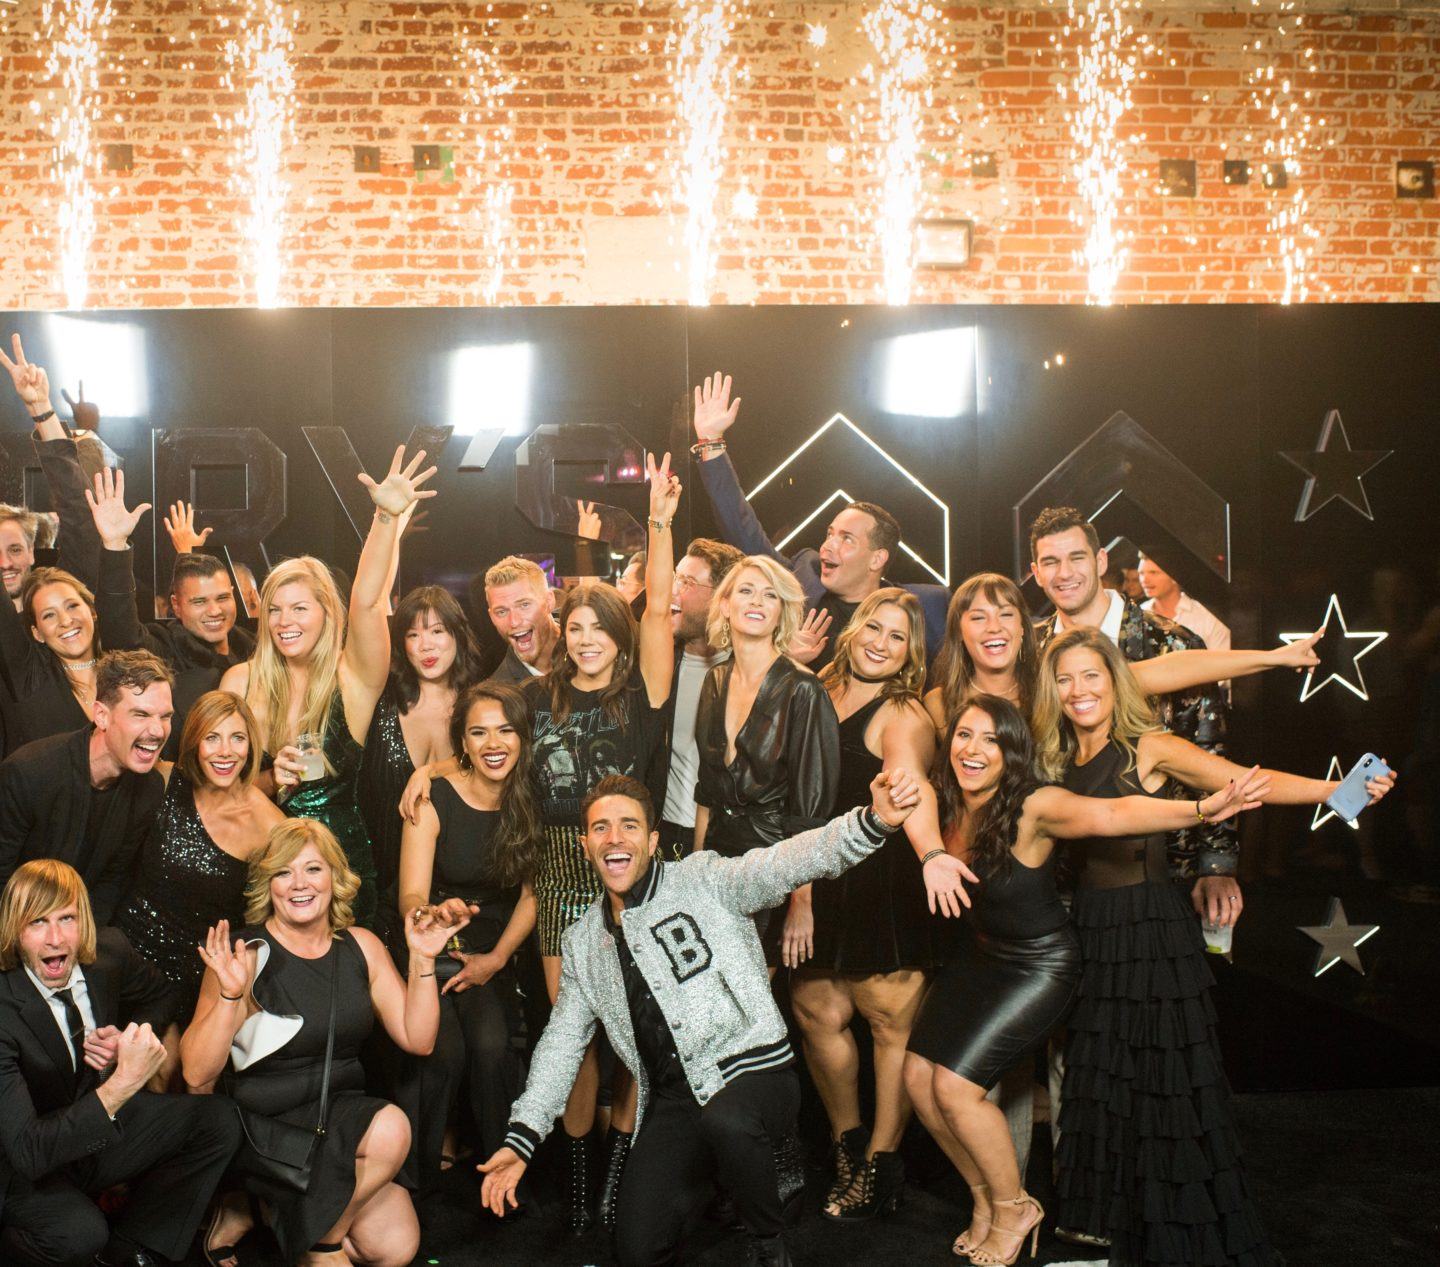 Barry's Bootcamp team dressed in semi-formal black attire smiling with arms outstretched in front of wall with sparklers